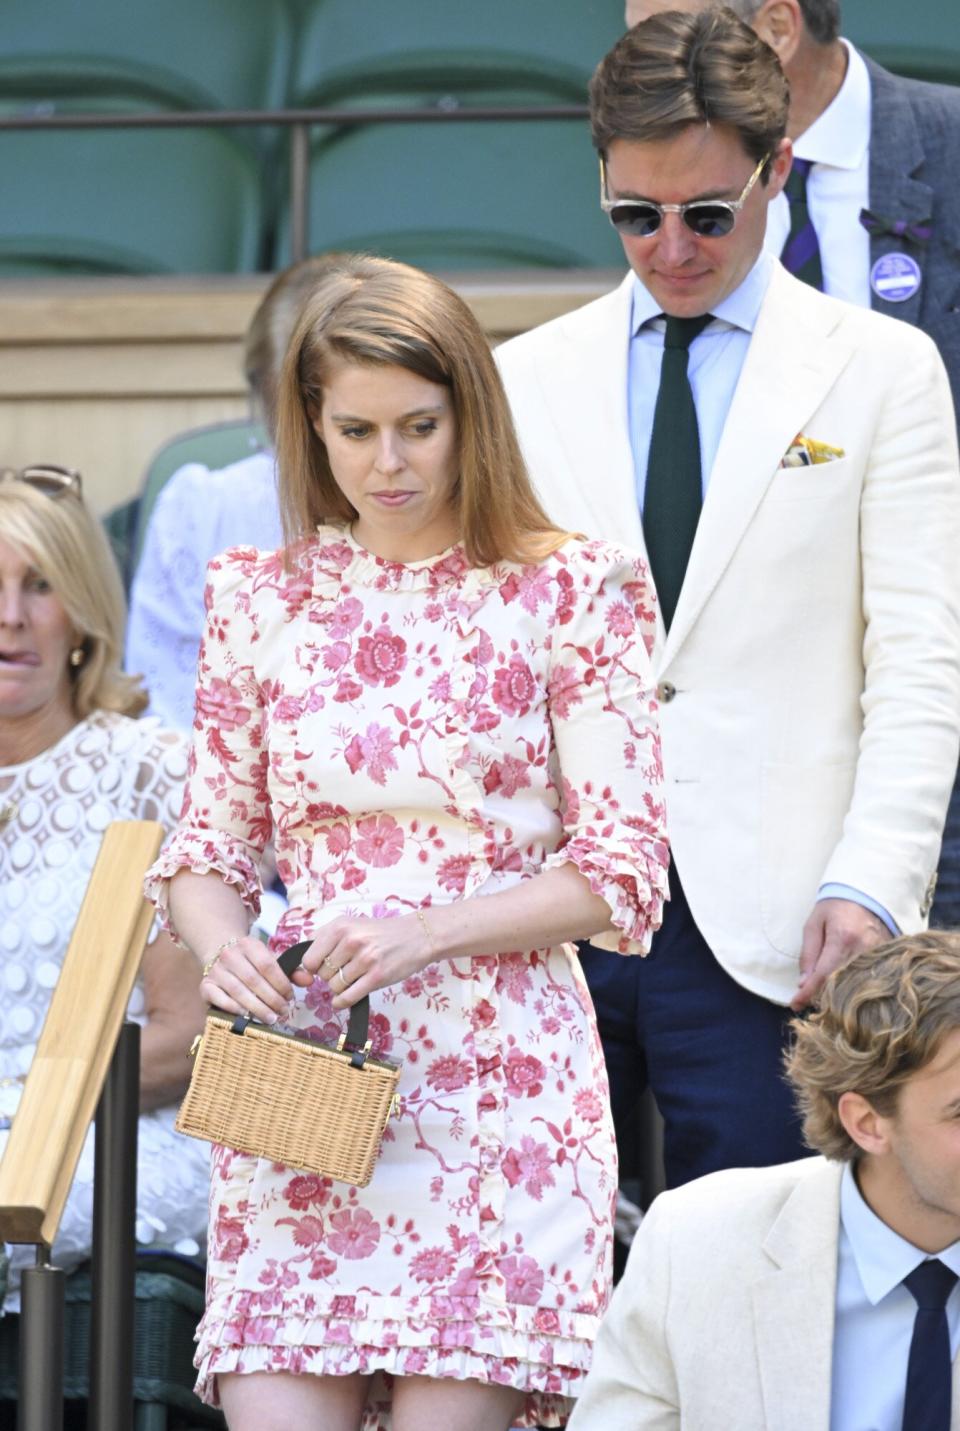 Edoardo Mapelli Mozzin and Princess Beatrice attend day 12 of the Wimbledon Tennis Championships at All England Lawn Tennis and Croquet Club on July 08, 2022 in London, England.